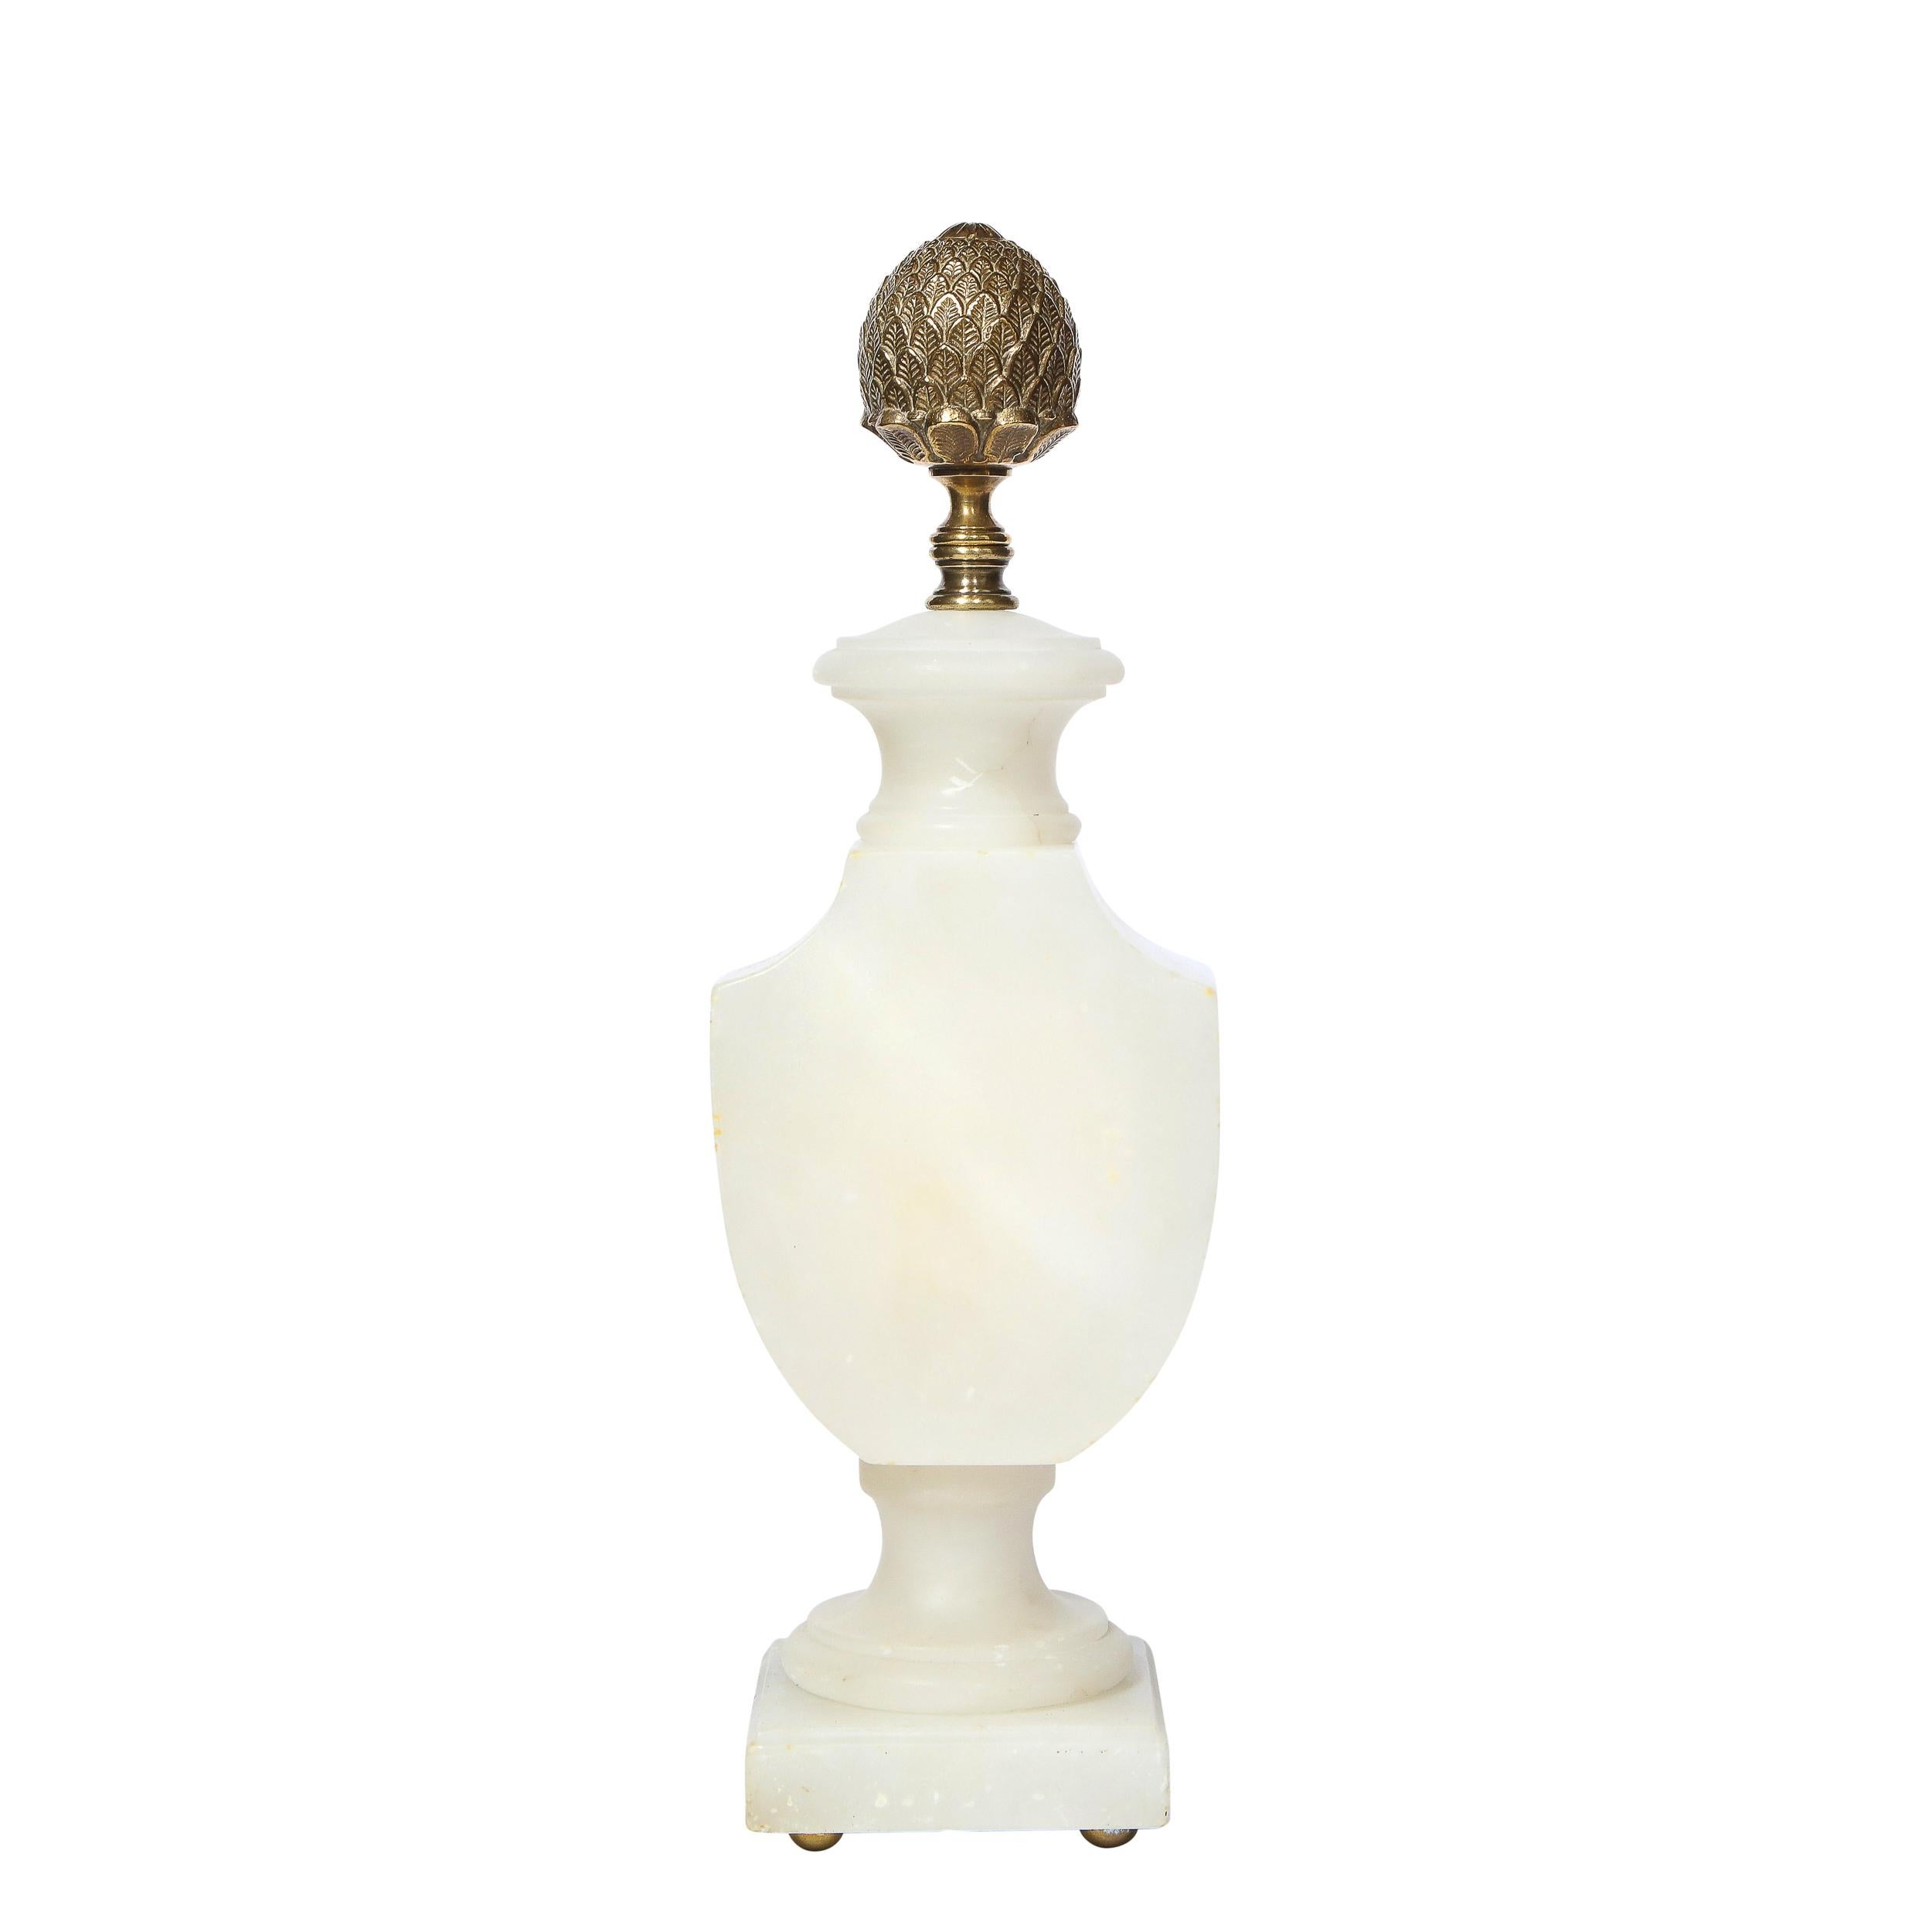 This gorgeous pair of 1940s Hollywood Art Deco table lamps were realized in France, circa 1940. They offer sculptural carved alabaster stylized urn form bodies that are illuminated from within crowned with bronze pommes de pin finials. With their